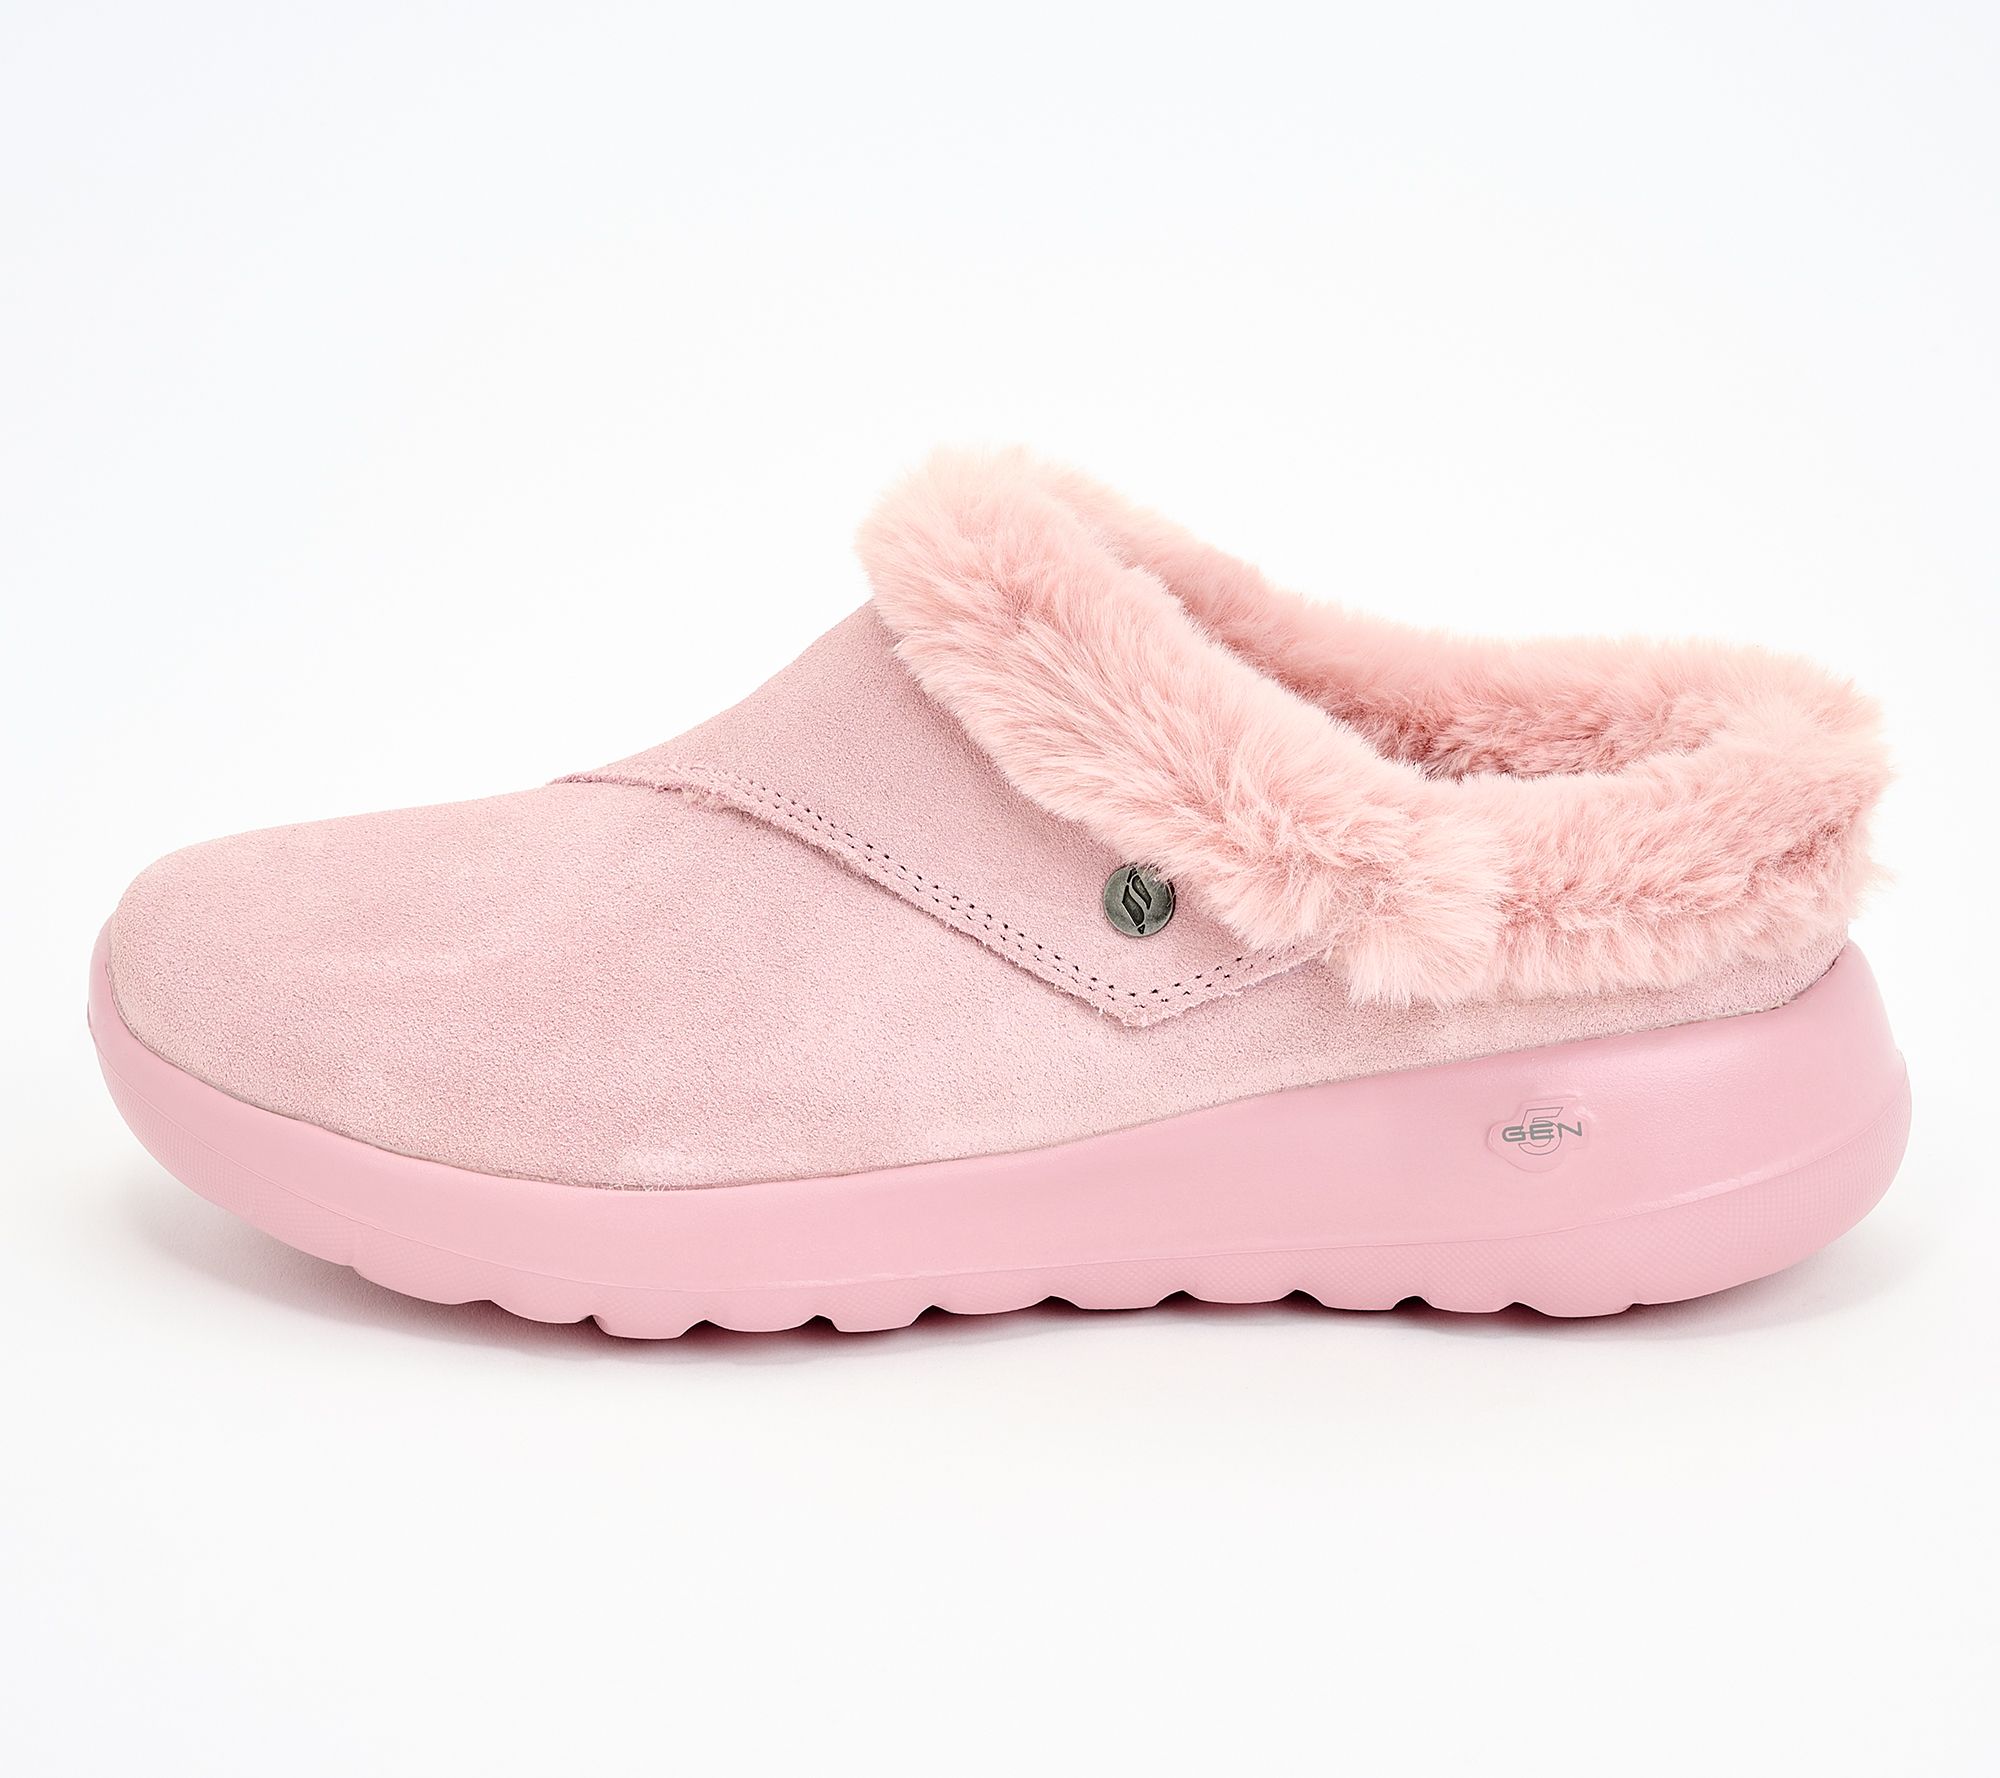 Skechers On-The-Go Joy Suede and Faux Fur Slip-Ons - Cozy Life, Size 7 Medium, Mauve